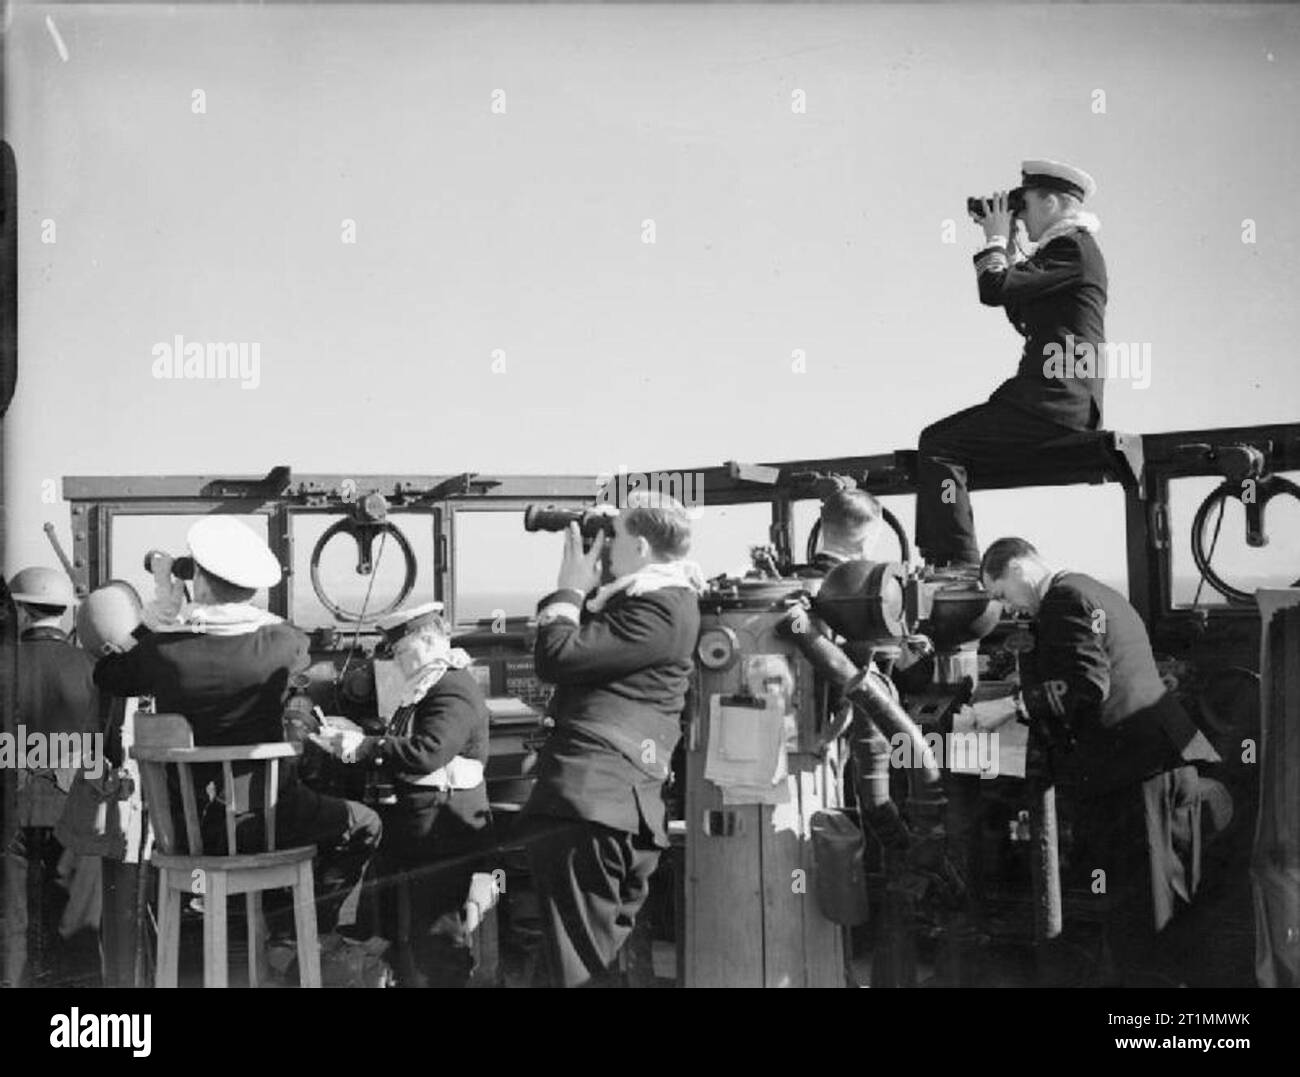 The Royal Navy during the Second World War The Commanding Officer of HMS ORION, Captain J P Gornall, of Steyning, Sussex, perched on the baffle of the cruiser's bridge, to observe the effect of the bombardment in support of Fifth Army's landings at Anzio in the opening stages in the battle for Rome. As well as assisting with coastal bombardments the cruiser helped escort the landing craft of all types that swept into the beach in the wake of the minesweepers. Stock Photo